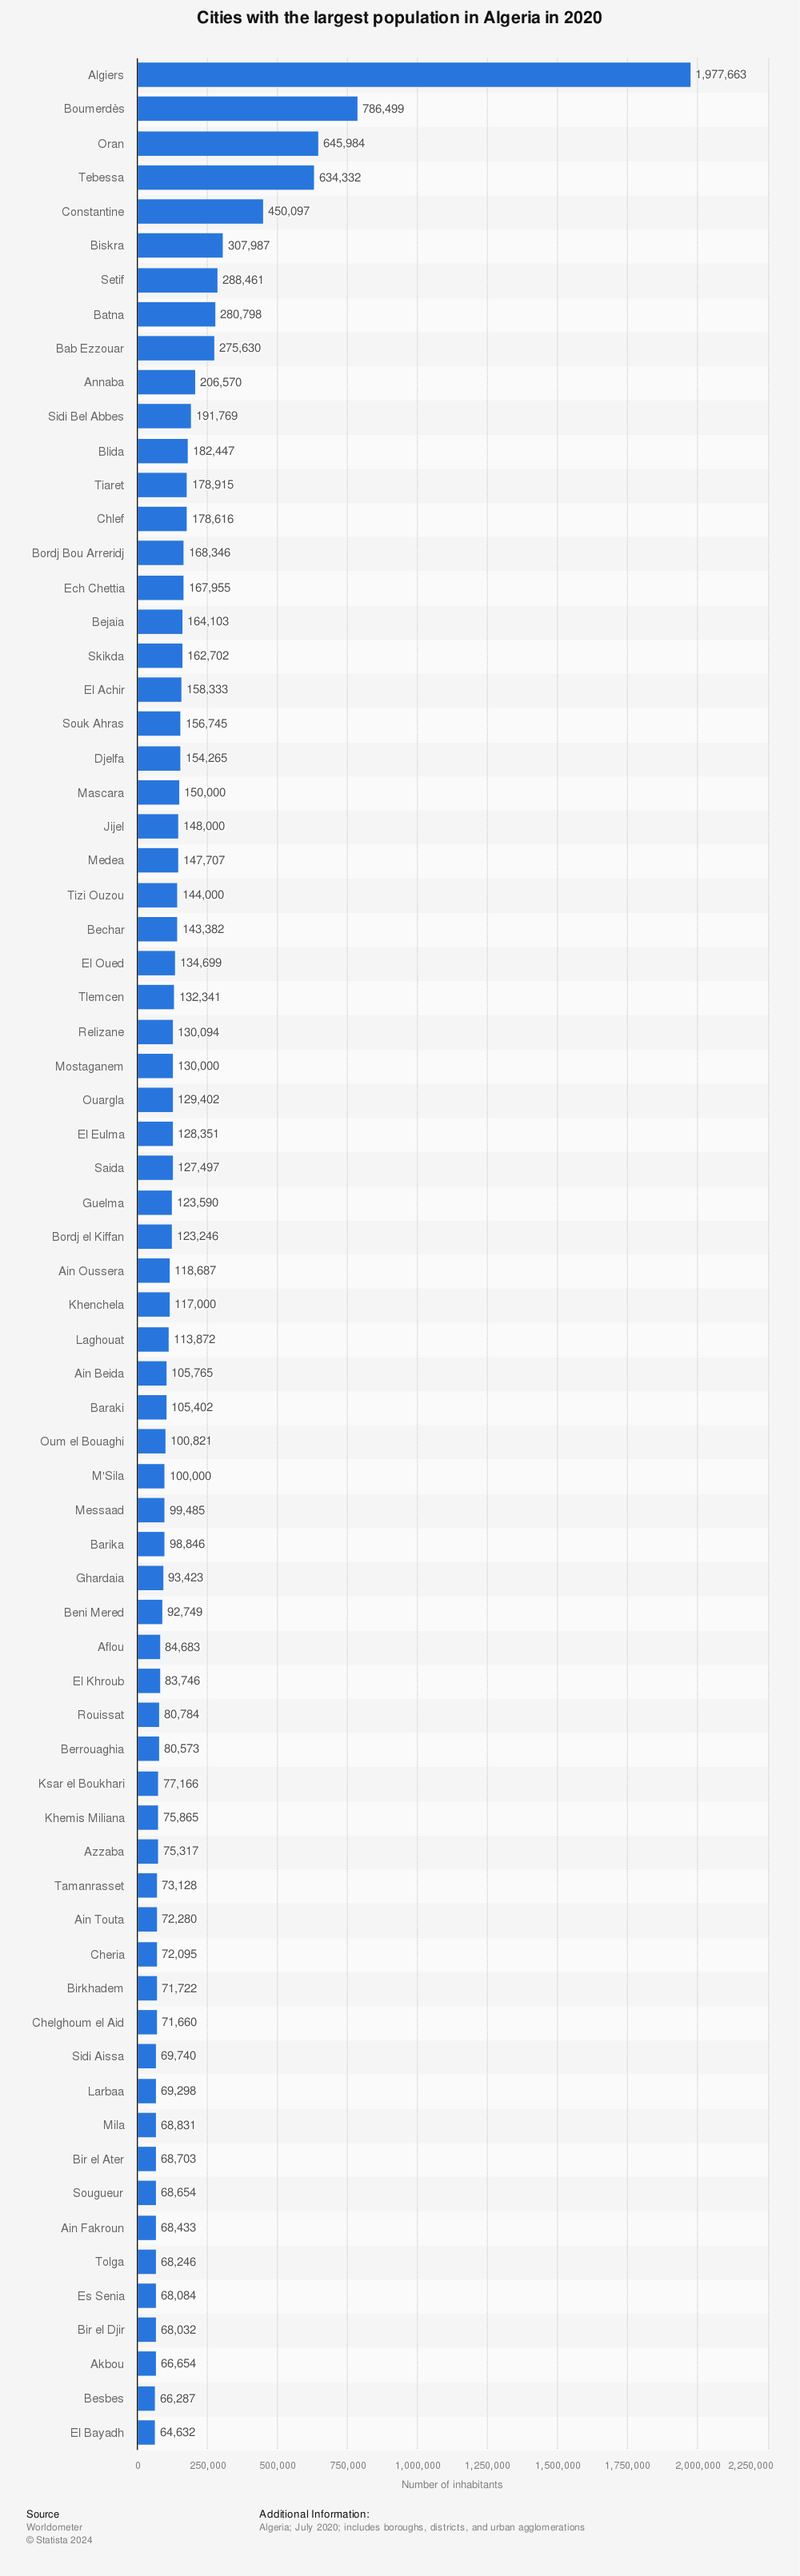 Statistic: Cities with the largest population in Algeria in 2020 | Statista